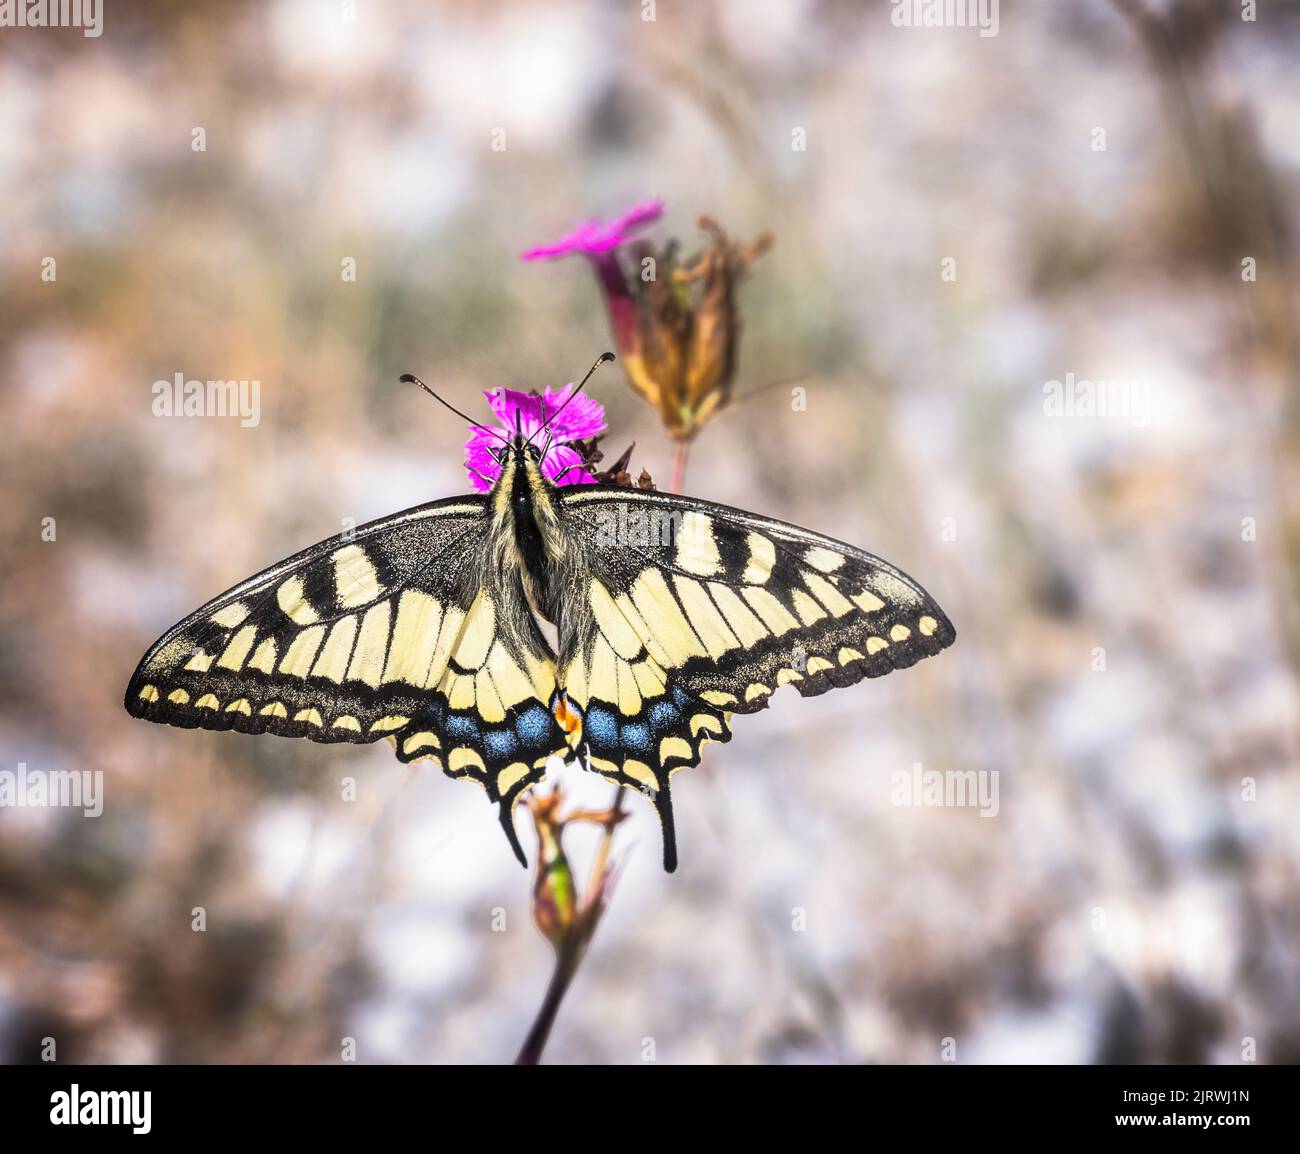 Macro of a swallowtail butterfly on a flower blossom Stock Photo